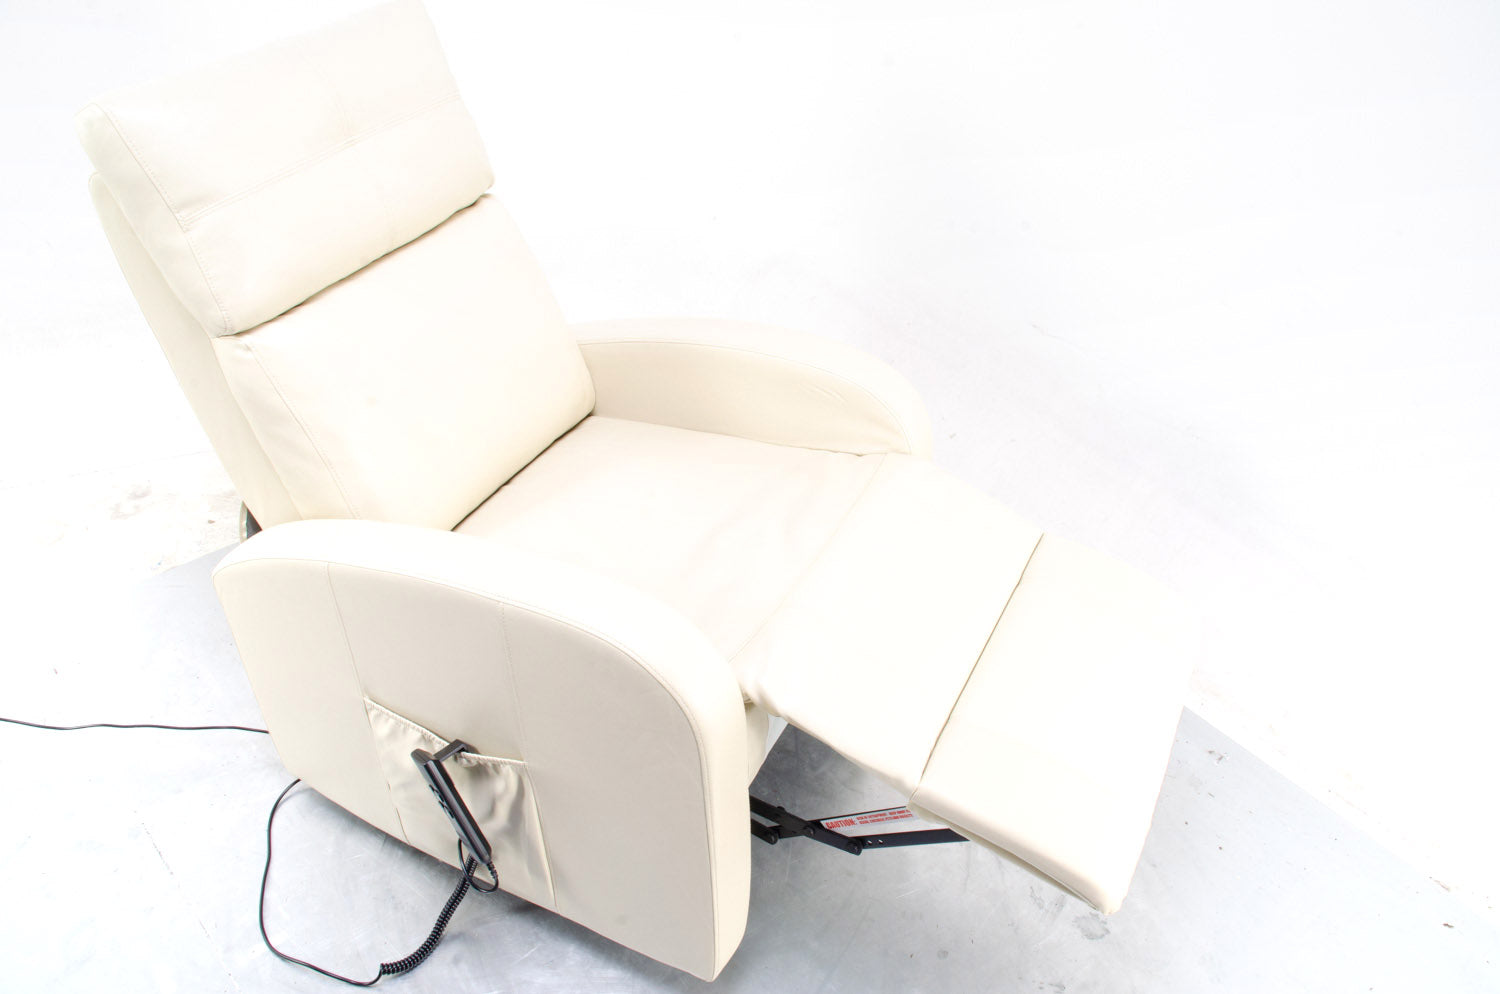 New Restwell Dual Motor Rise & Recline Chair from Drive DeVilbiss in Cream